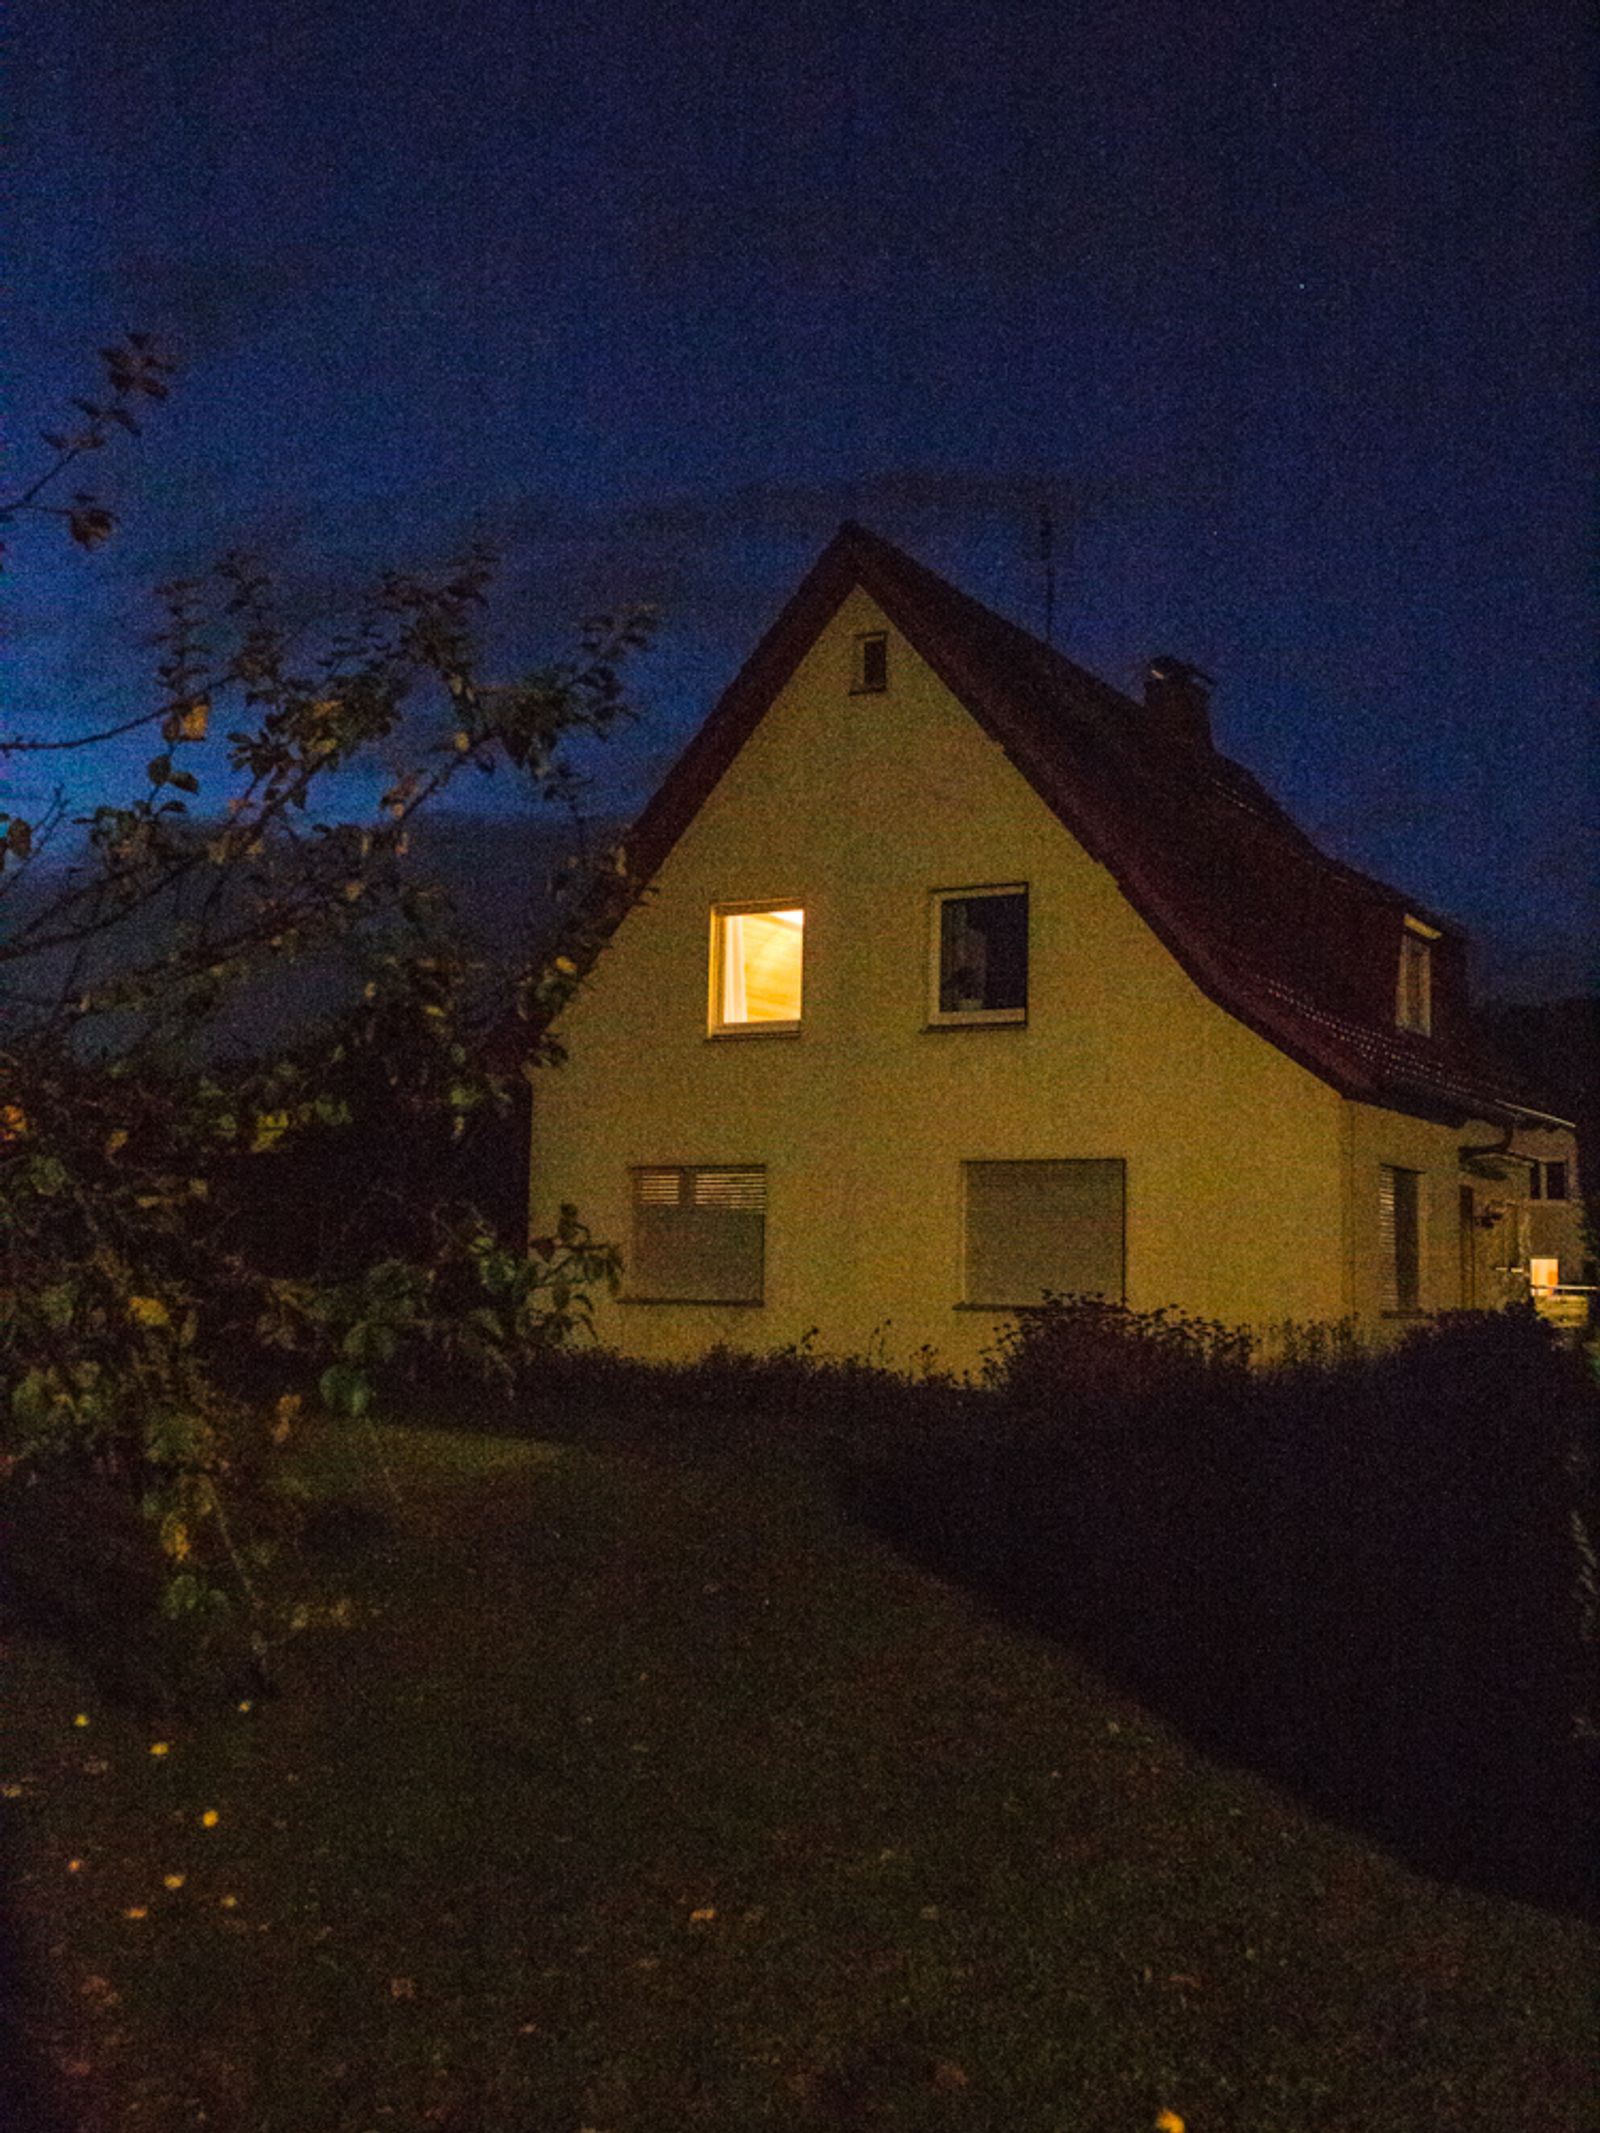 © Lea Franke - "The house where Lars lives at night, his room is brightly lit"